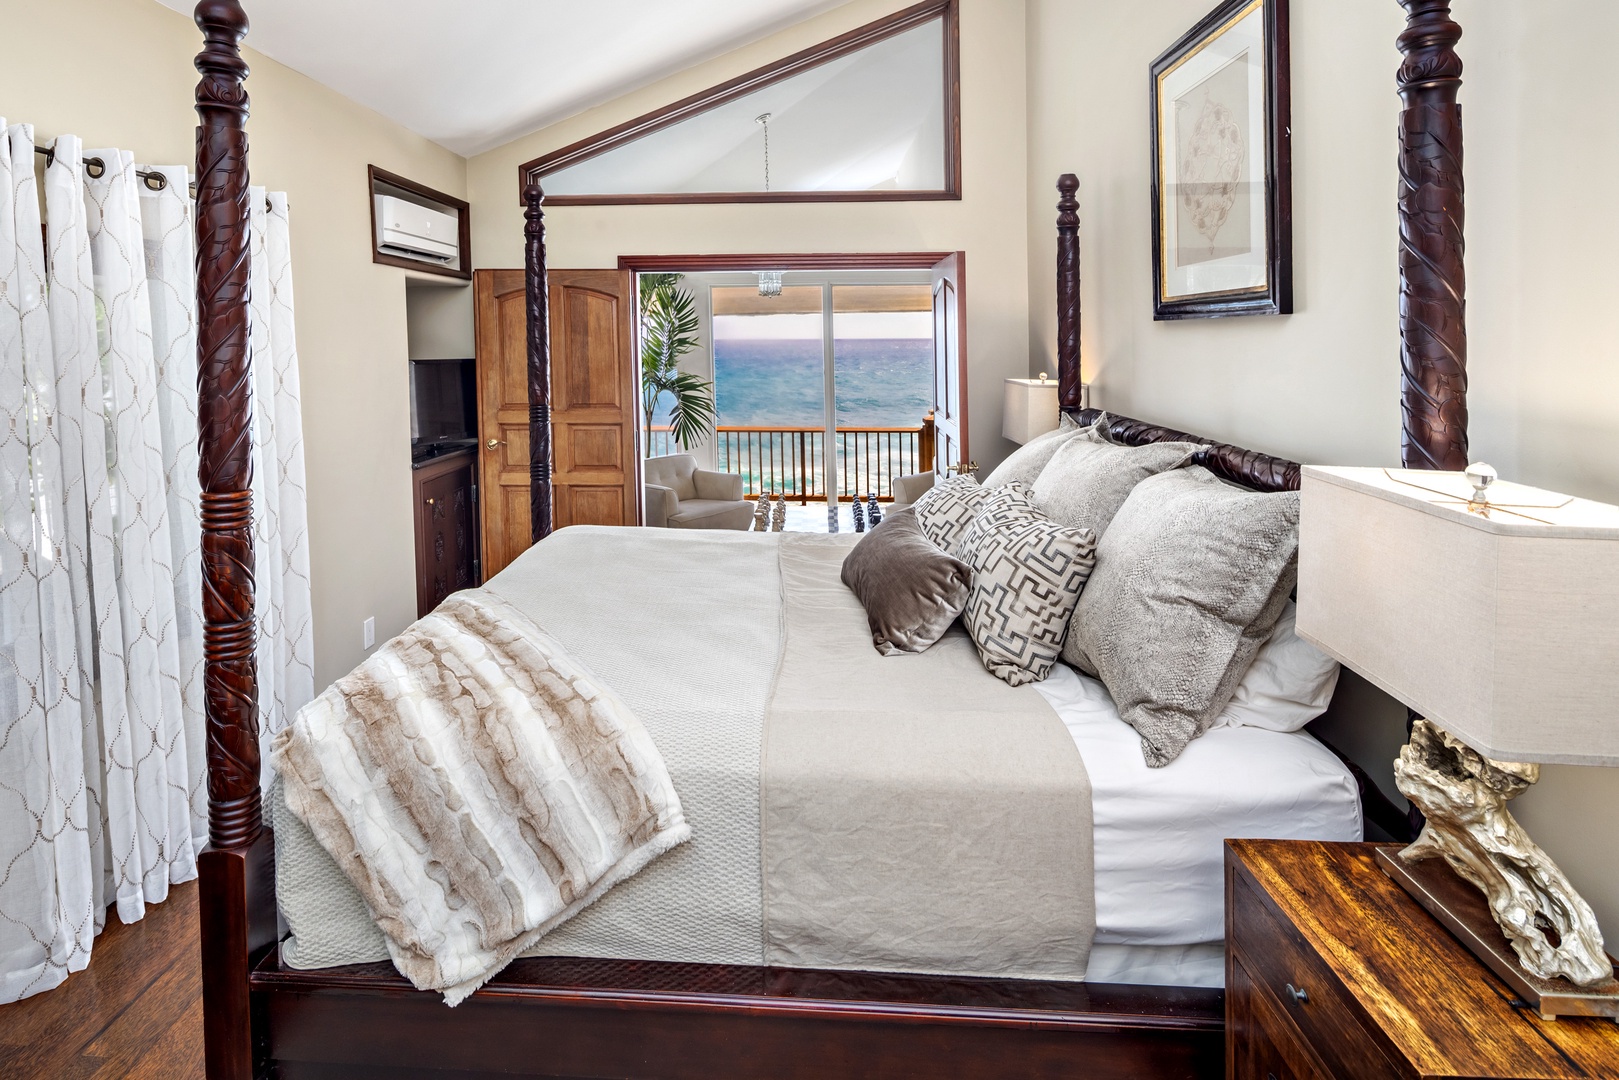 Honolulu Vacation Rentals, Kaiko'o Villa* - Ocean view from the third bedroom